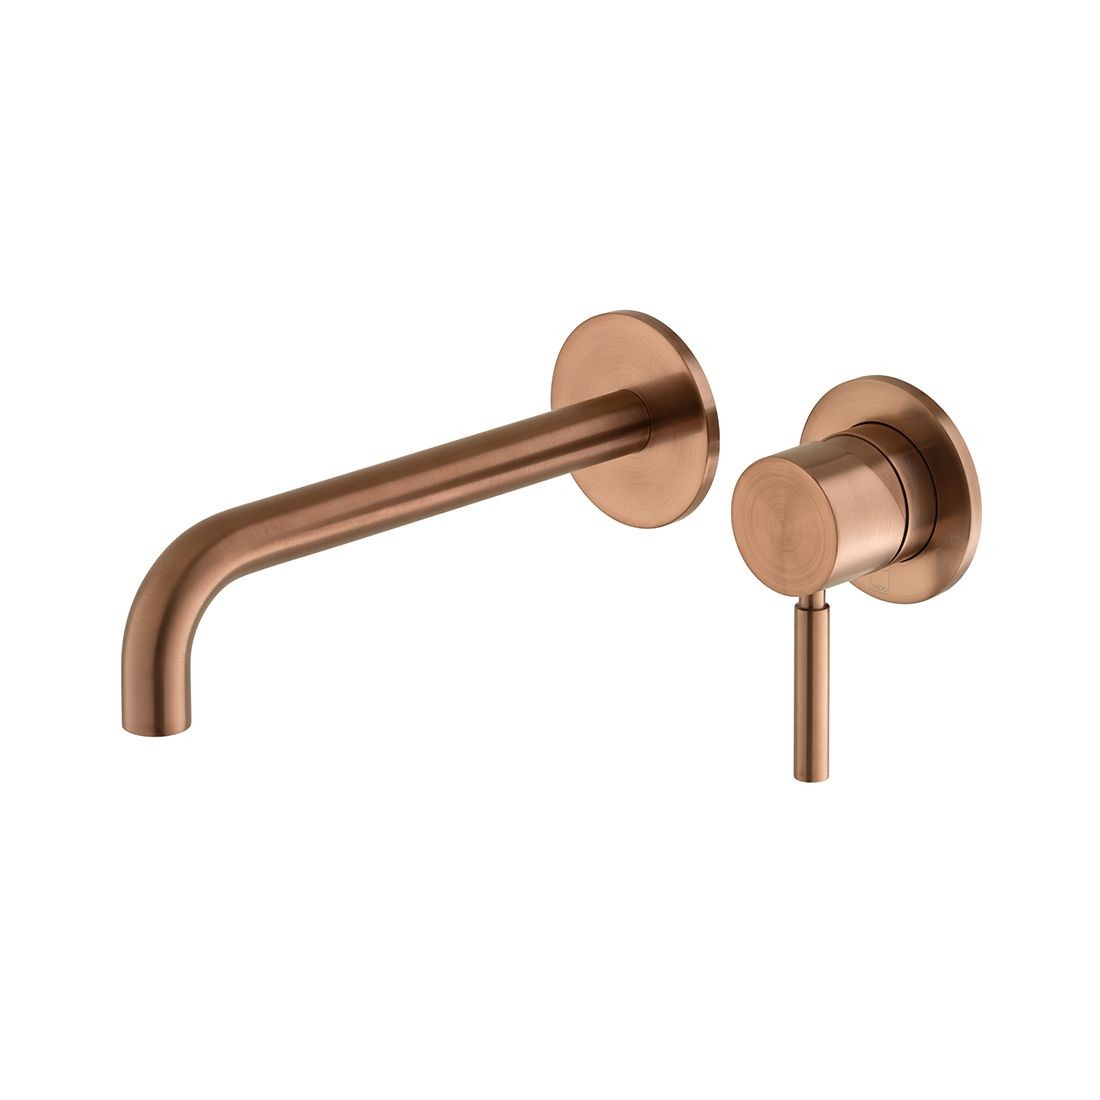 Individual by Vado Origins Slimline Wall Mounted Basin Mixer Tap with 180mm Spout (2 Tapholes) Brushed Bronze [IND-ORI209SA-BRZ]